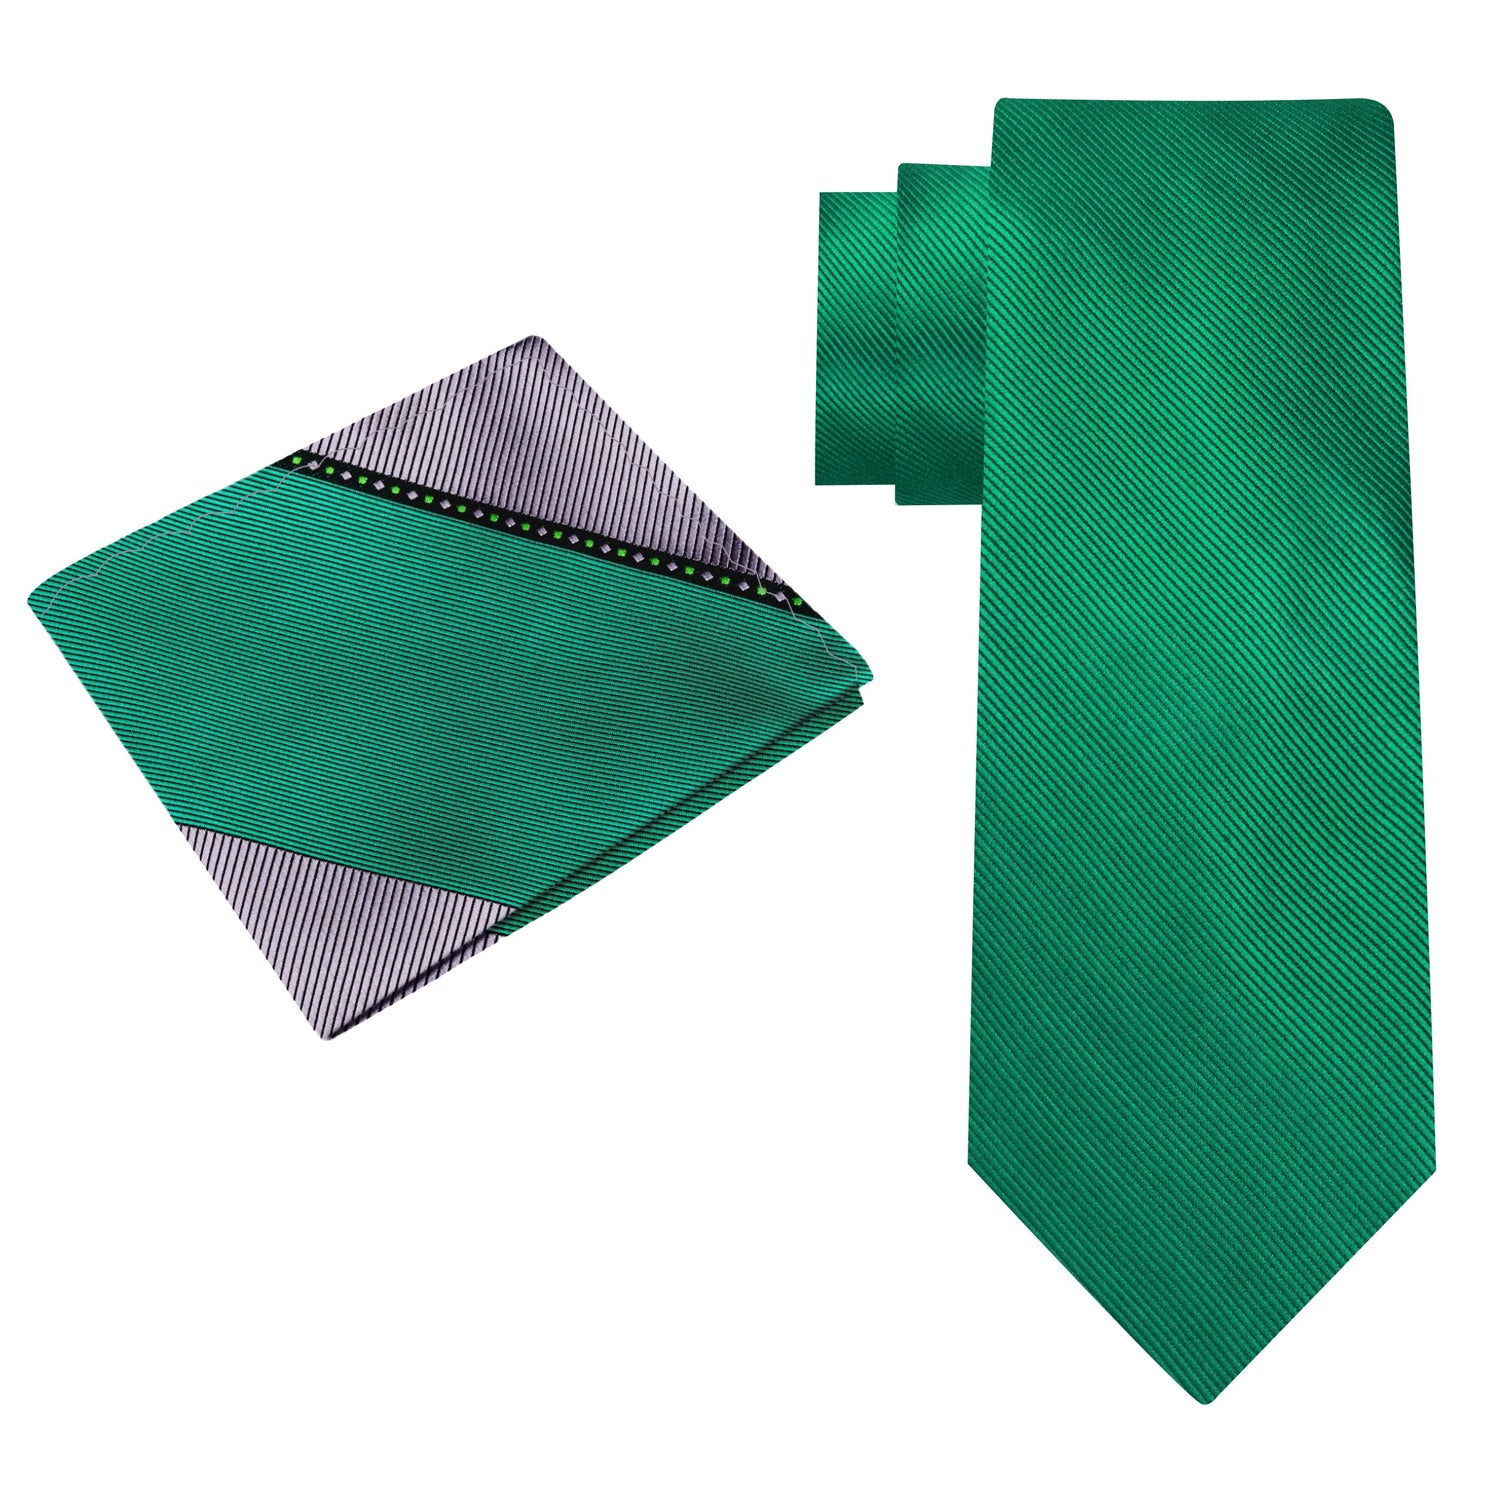 Alt View: Solid Green Necktie with Grey and Green Abstract Pocket Square